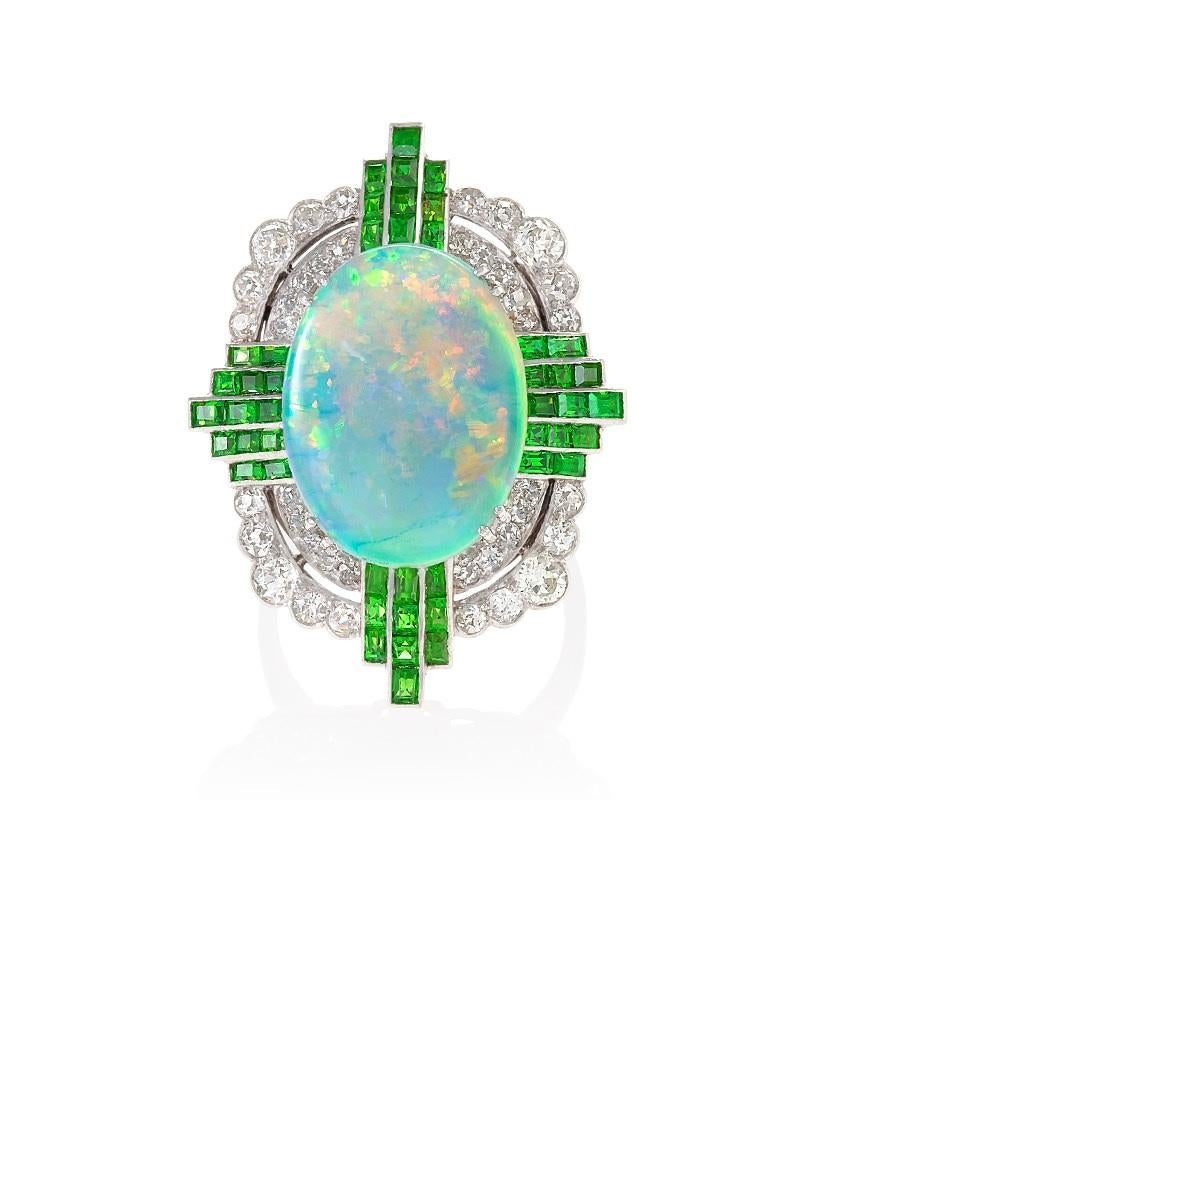 An Art Deco platinum ring with white opal, demantoid garnets and diamonds. The ring centers on a white opal that has an approximate weight of  3.77 carats. It is surrounded by  47 calibre-cut demantoid garnets with an approximate total weight of